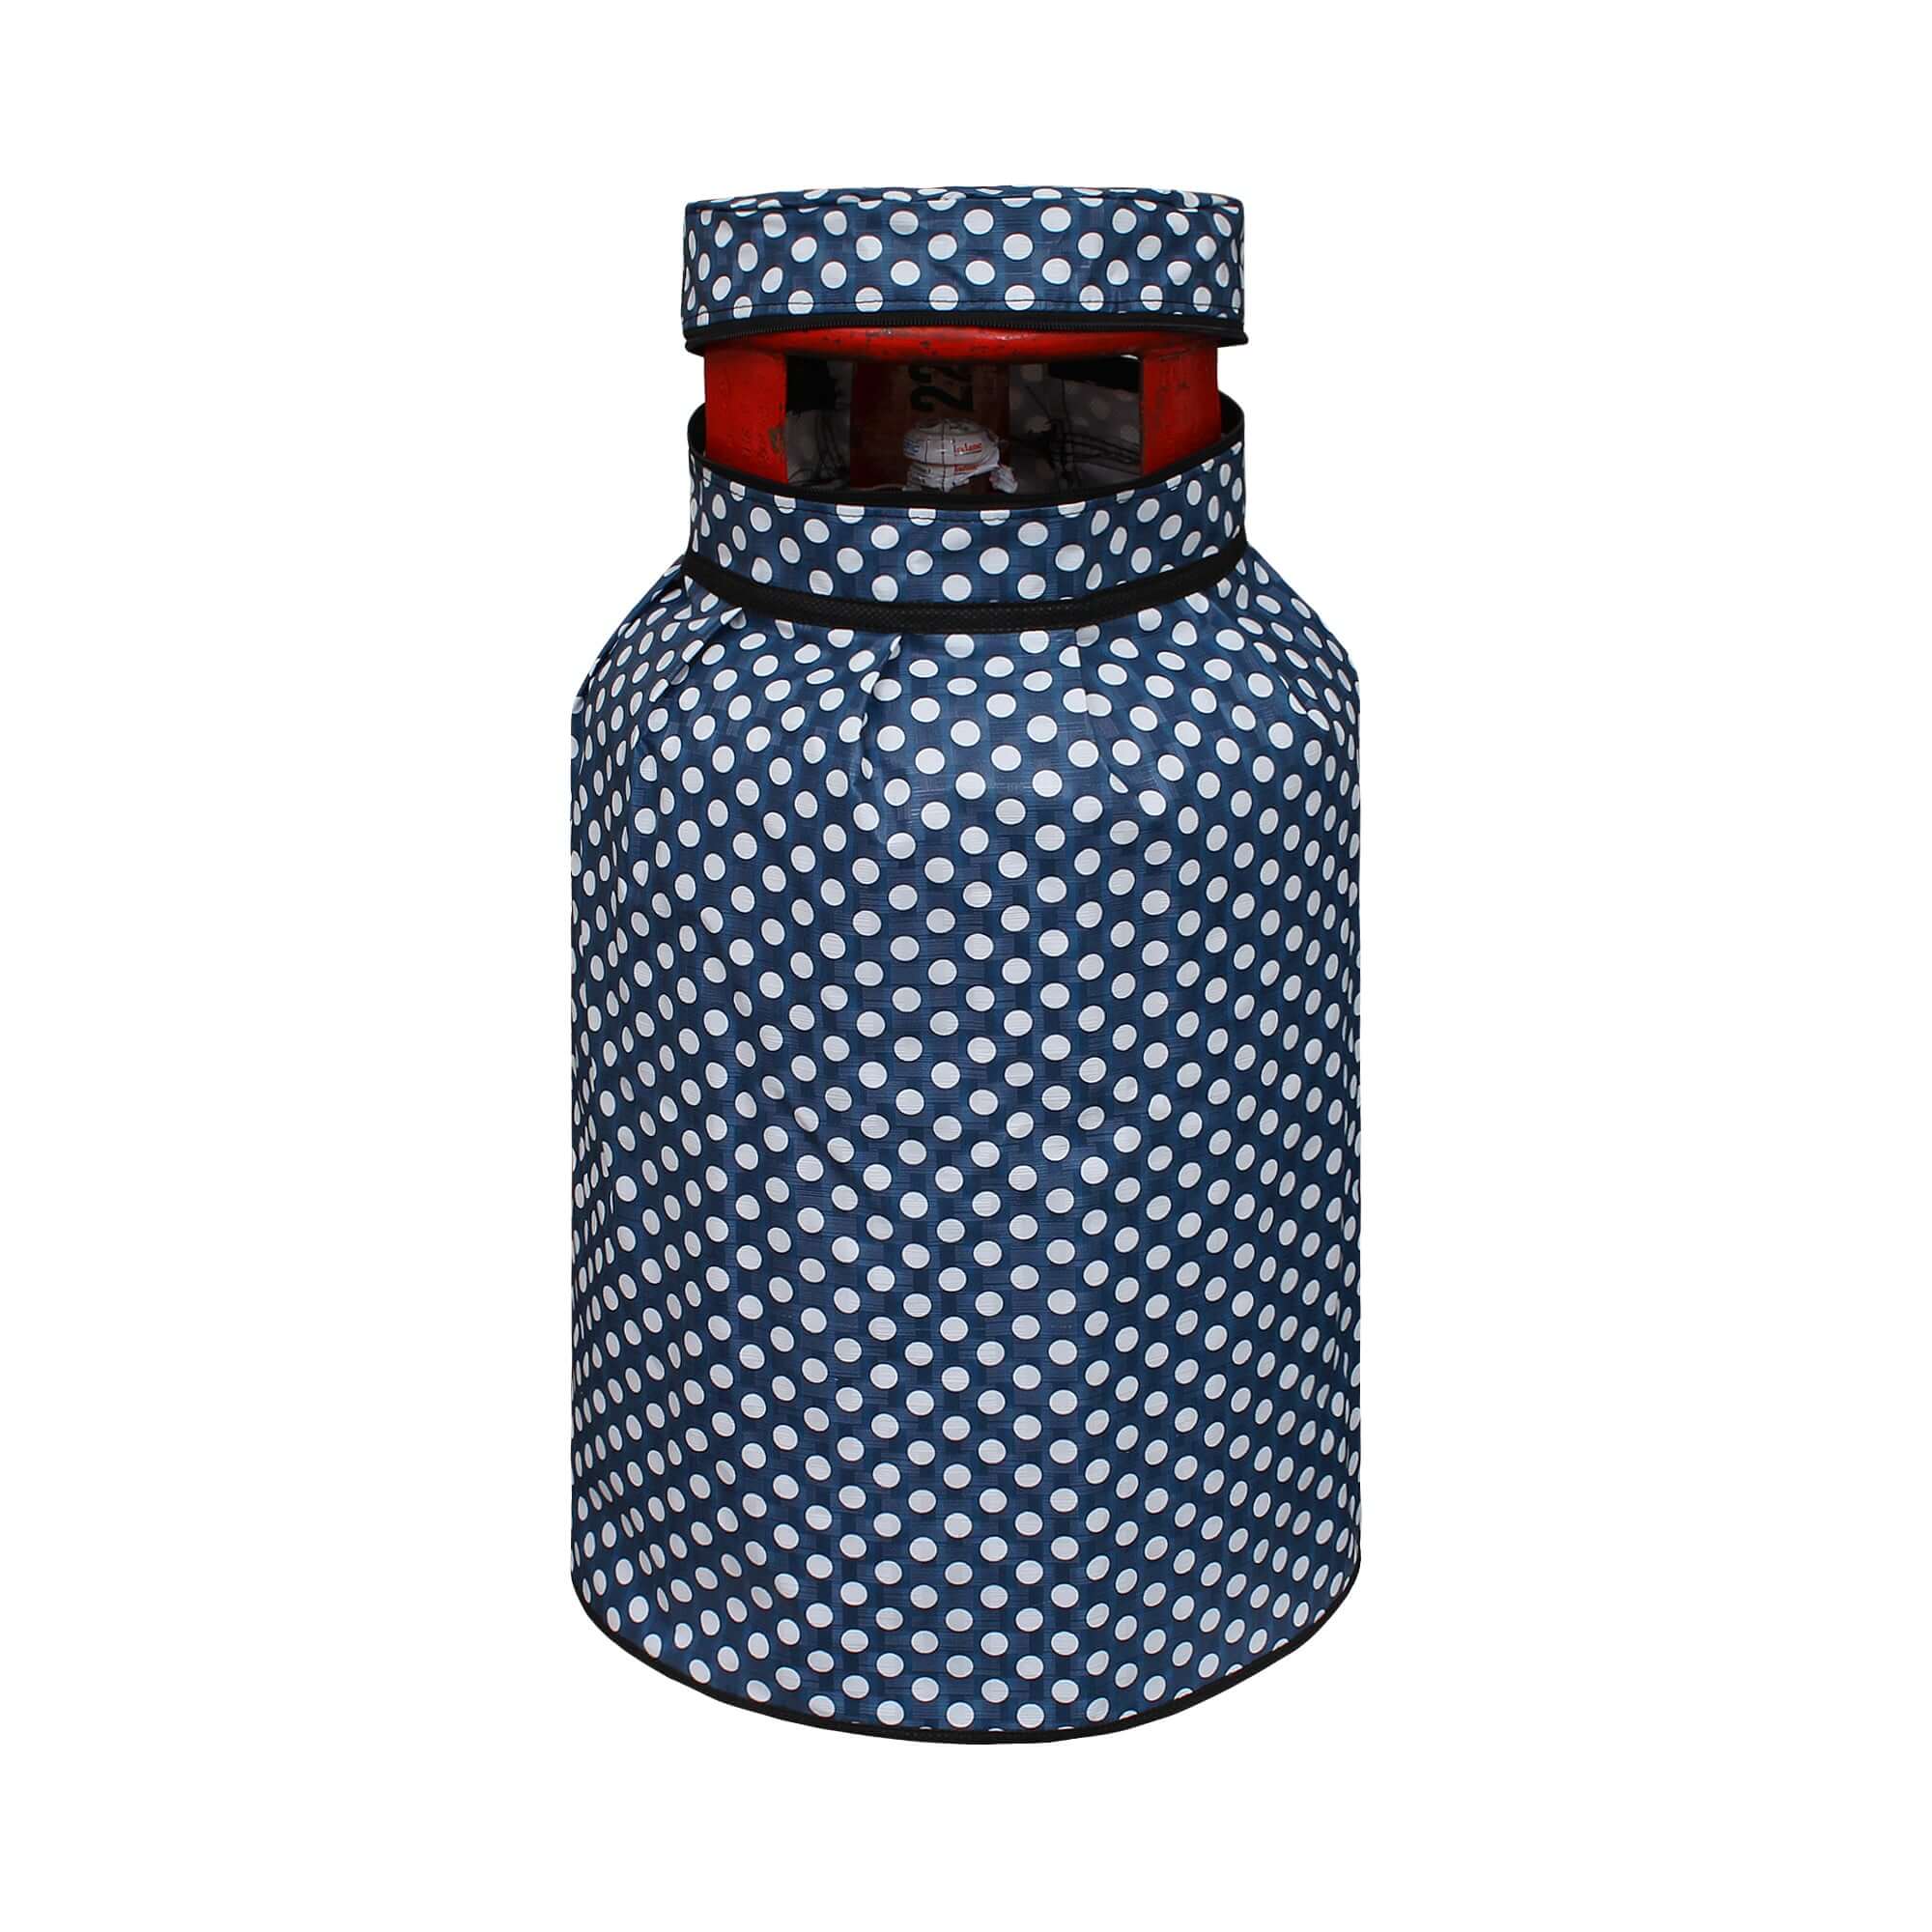 LPG Gas Cylinder Cover, SA47 - Dream Care Furnishings Private Limited